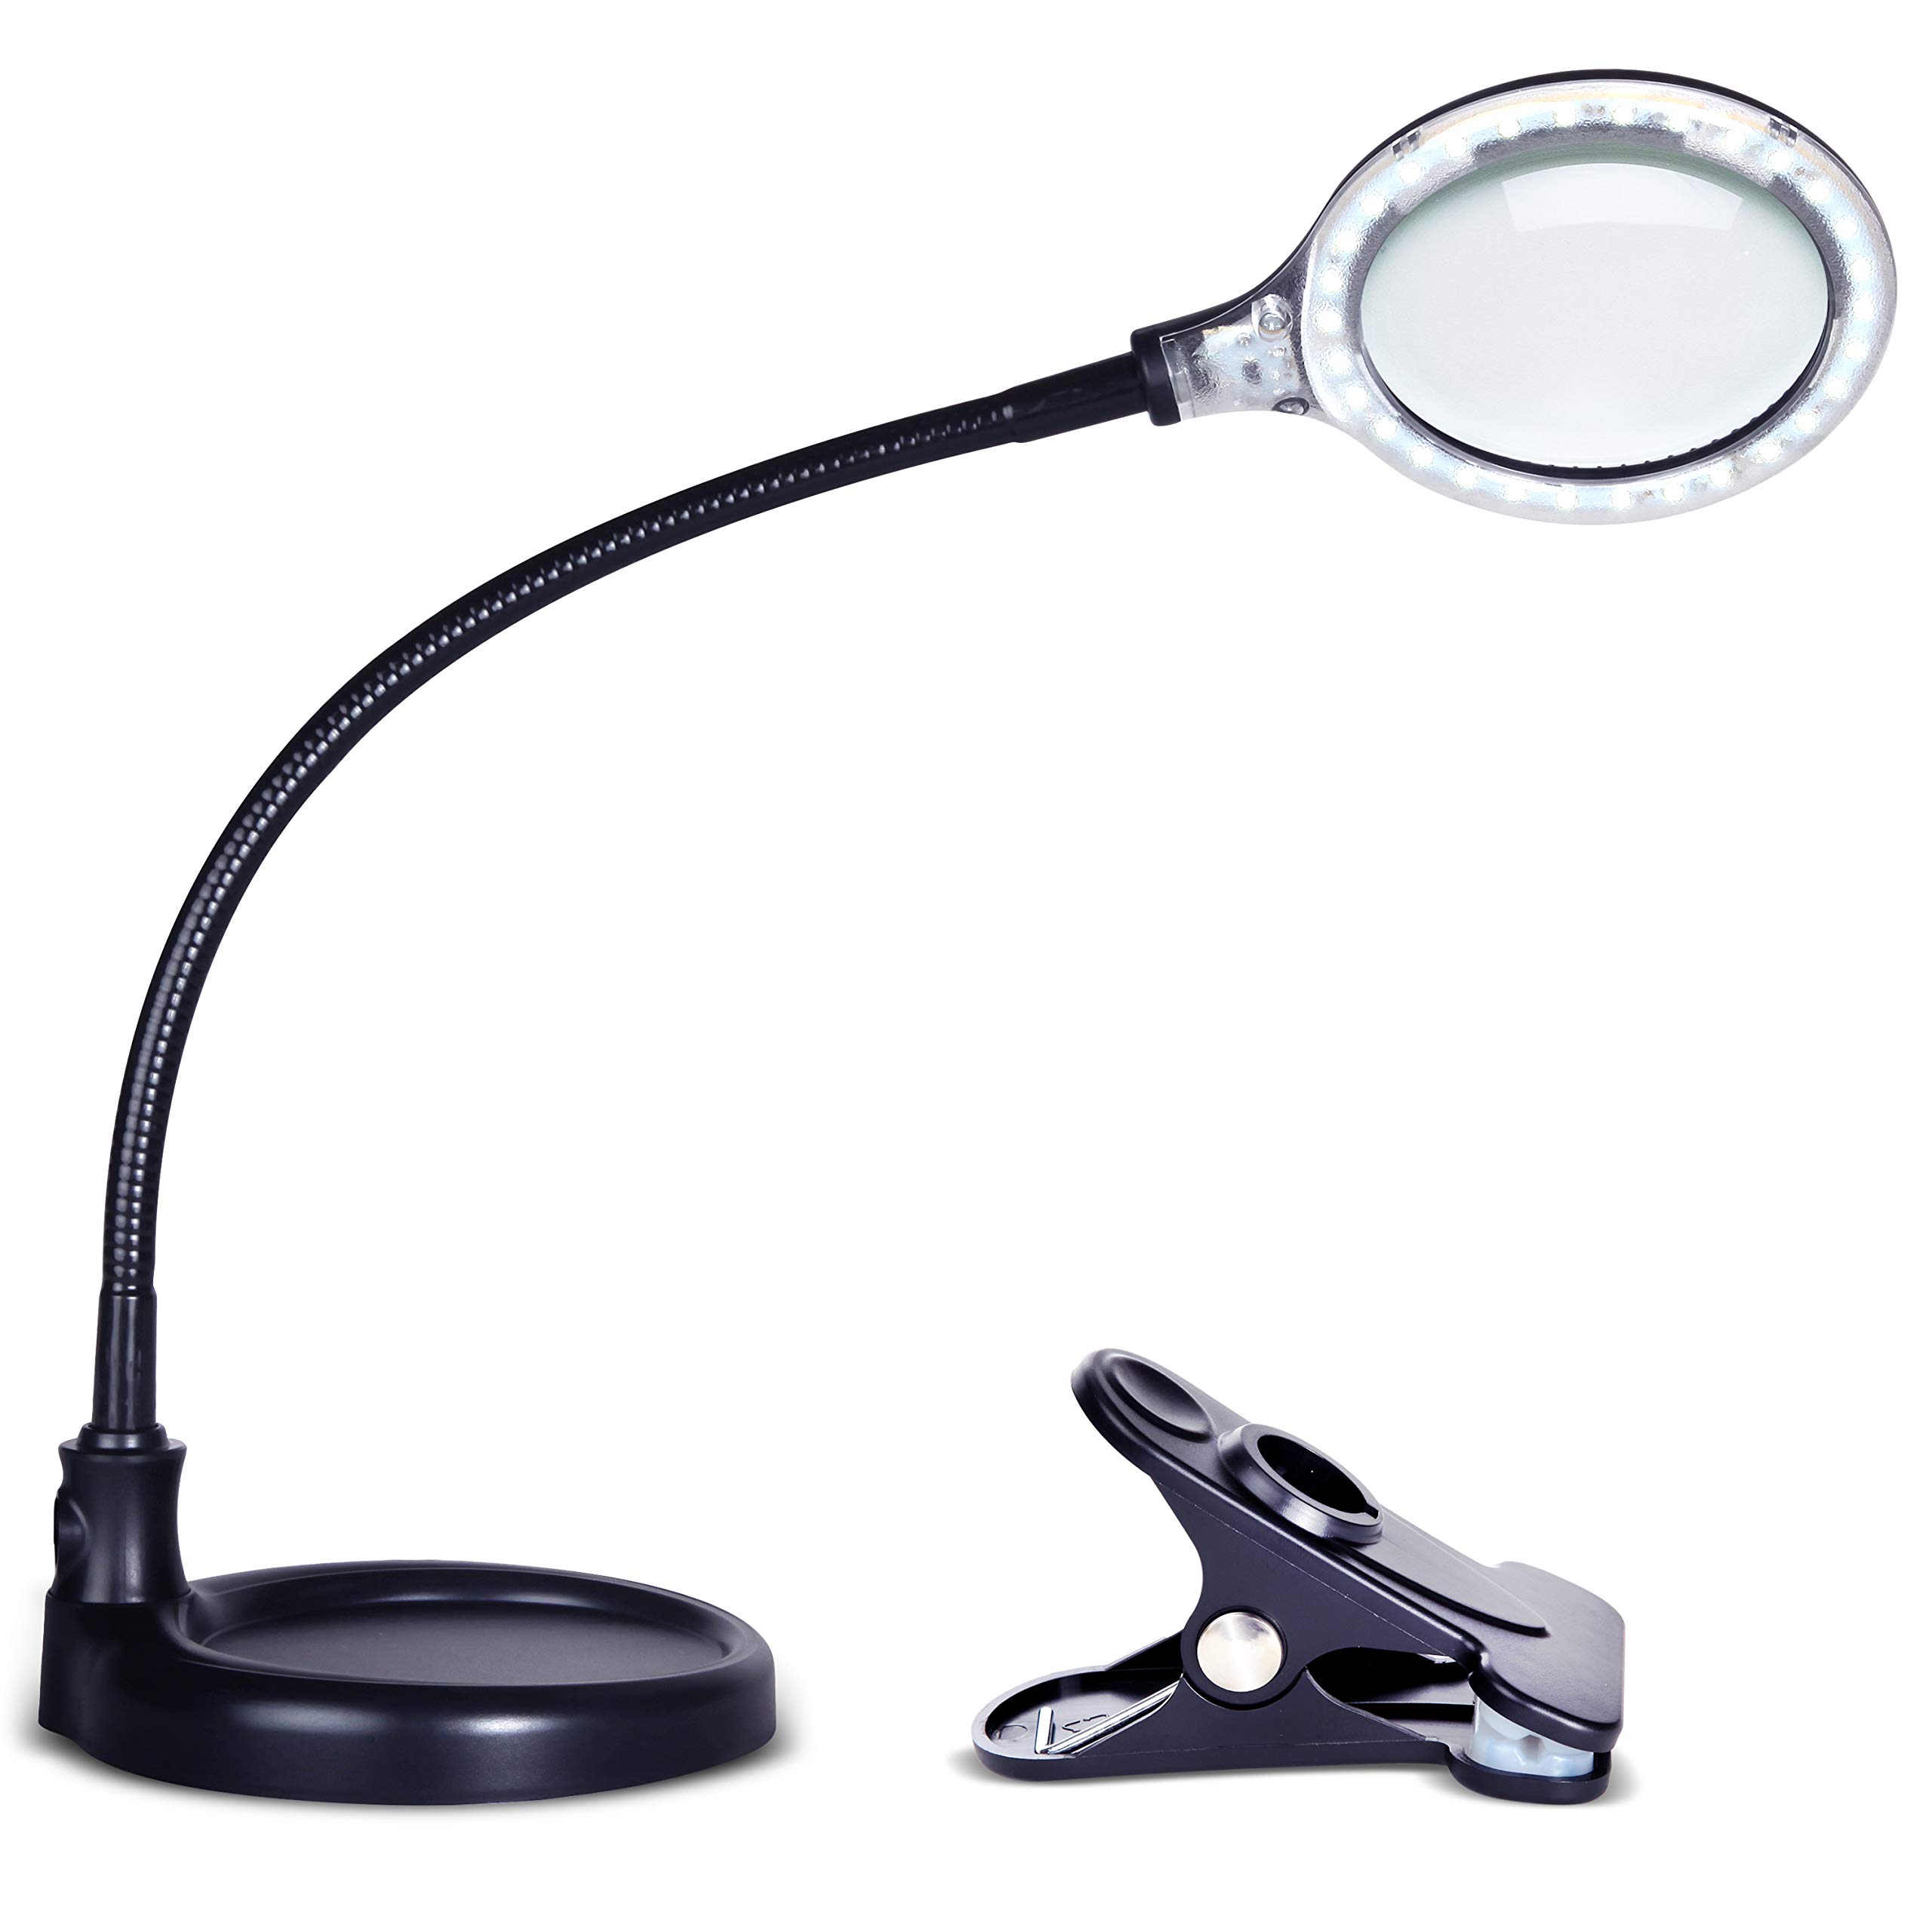 Brightech LightView Pro Flex 2 in 1 Magnifying Desk Lamp, 2.25x Light  Magnifier, Adjustable Magnifying Glass with Light for Craf